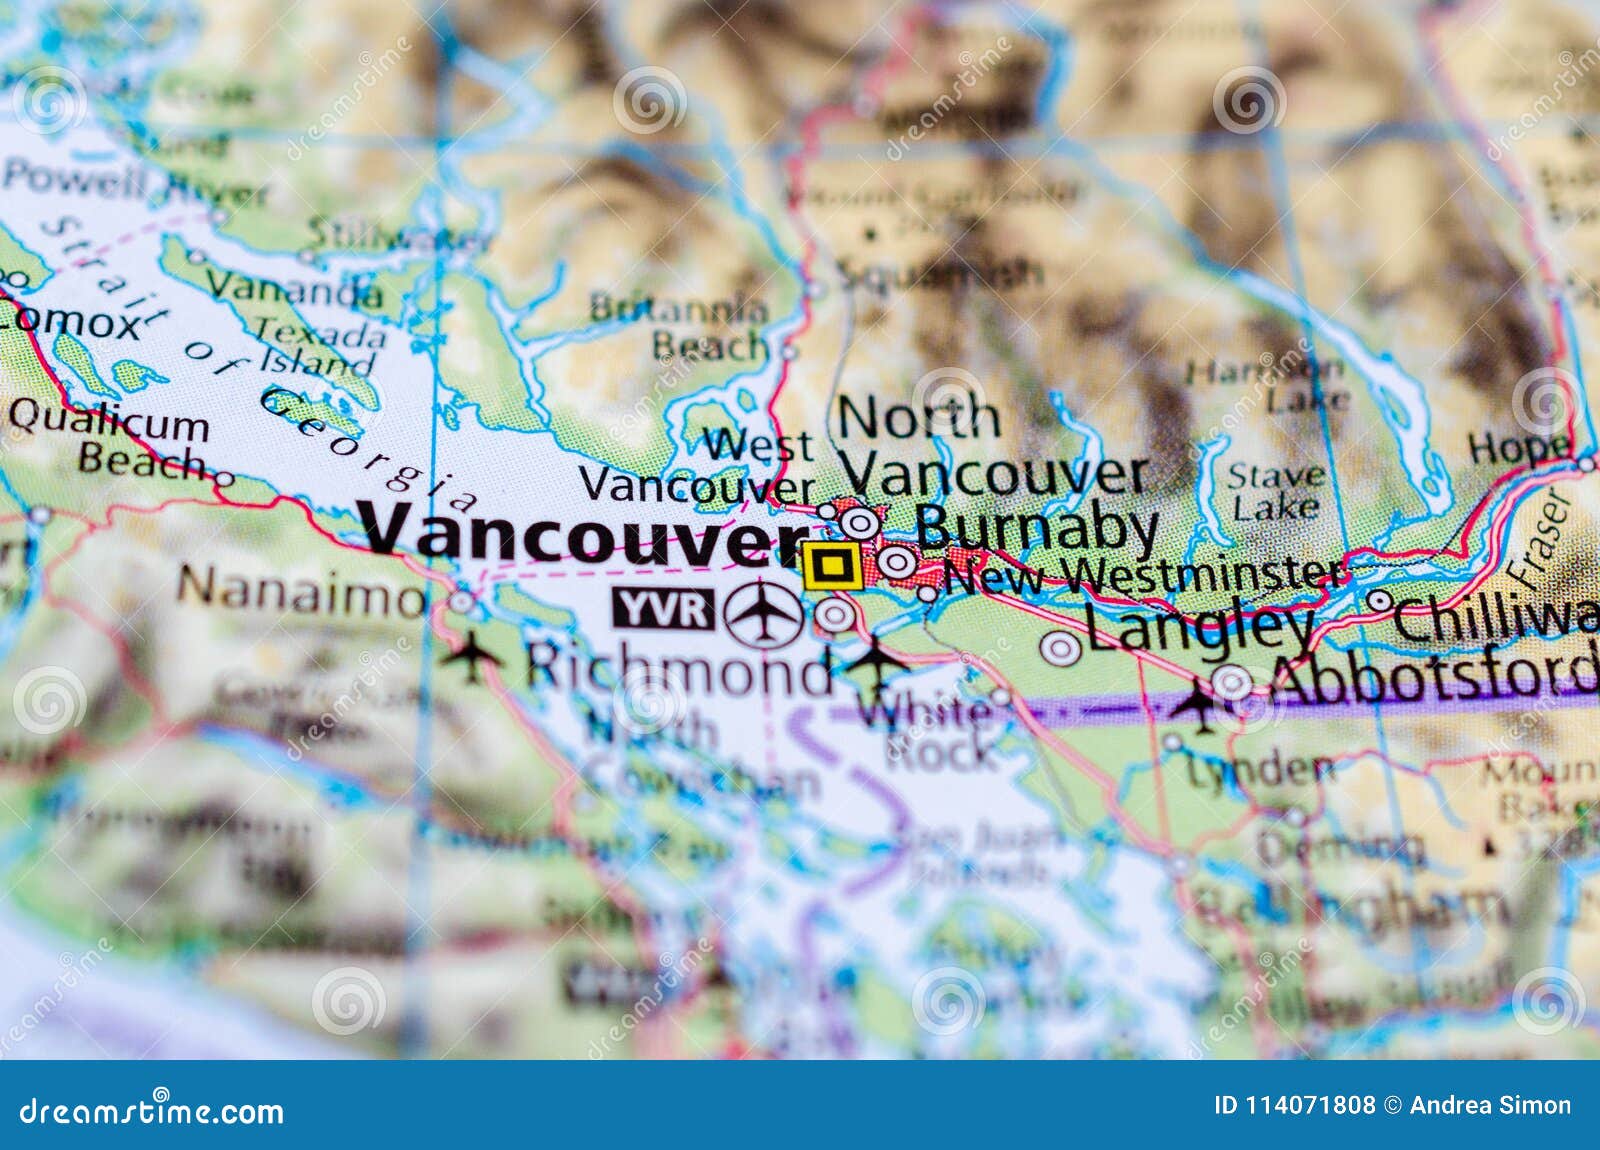 vancouver on map